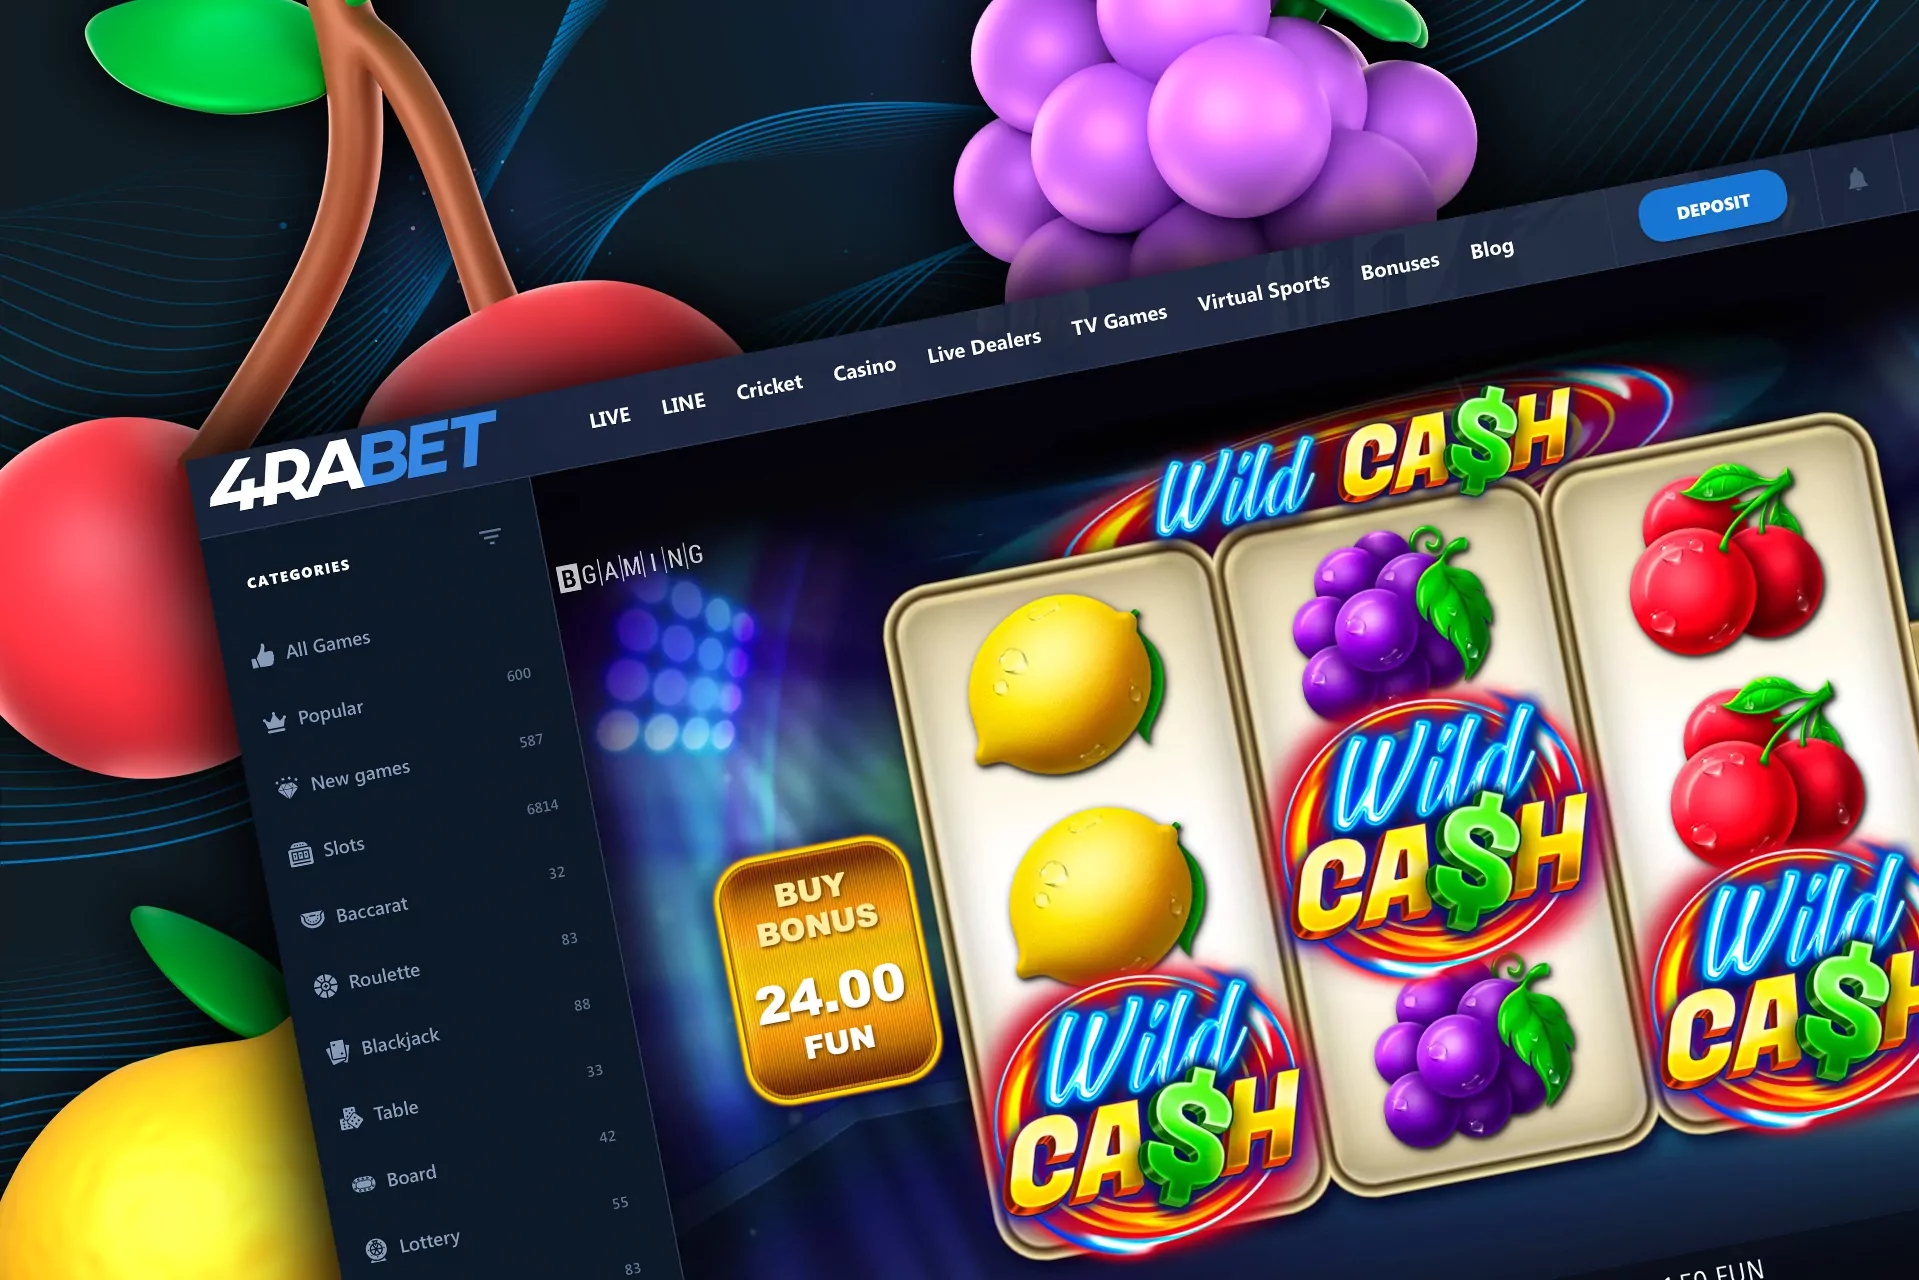 Slots section in 4rabet: all, popular, new and others.